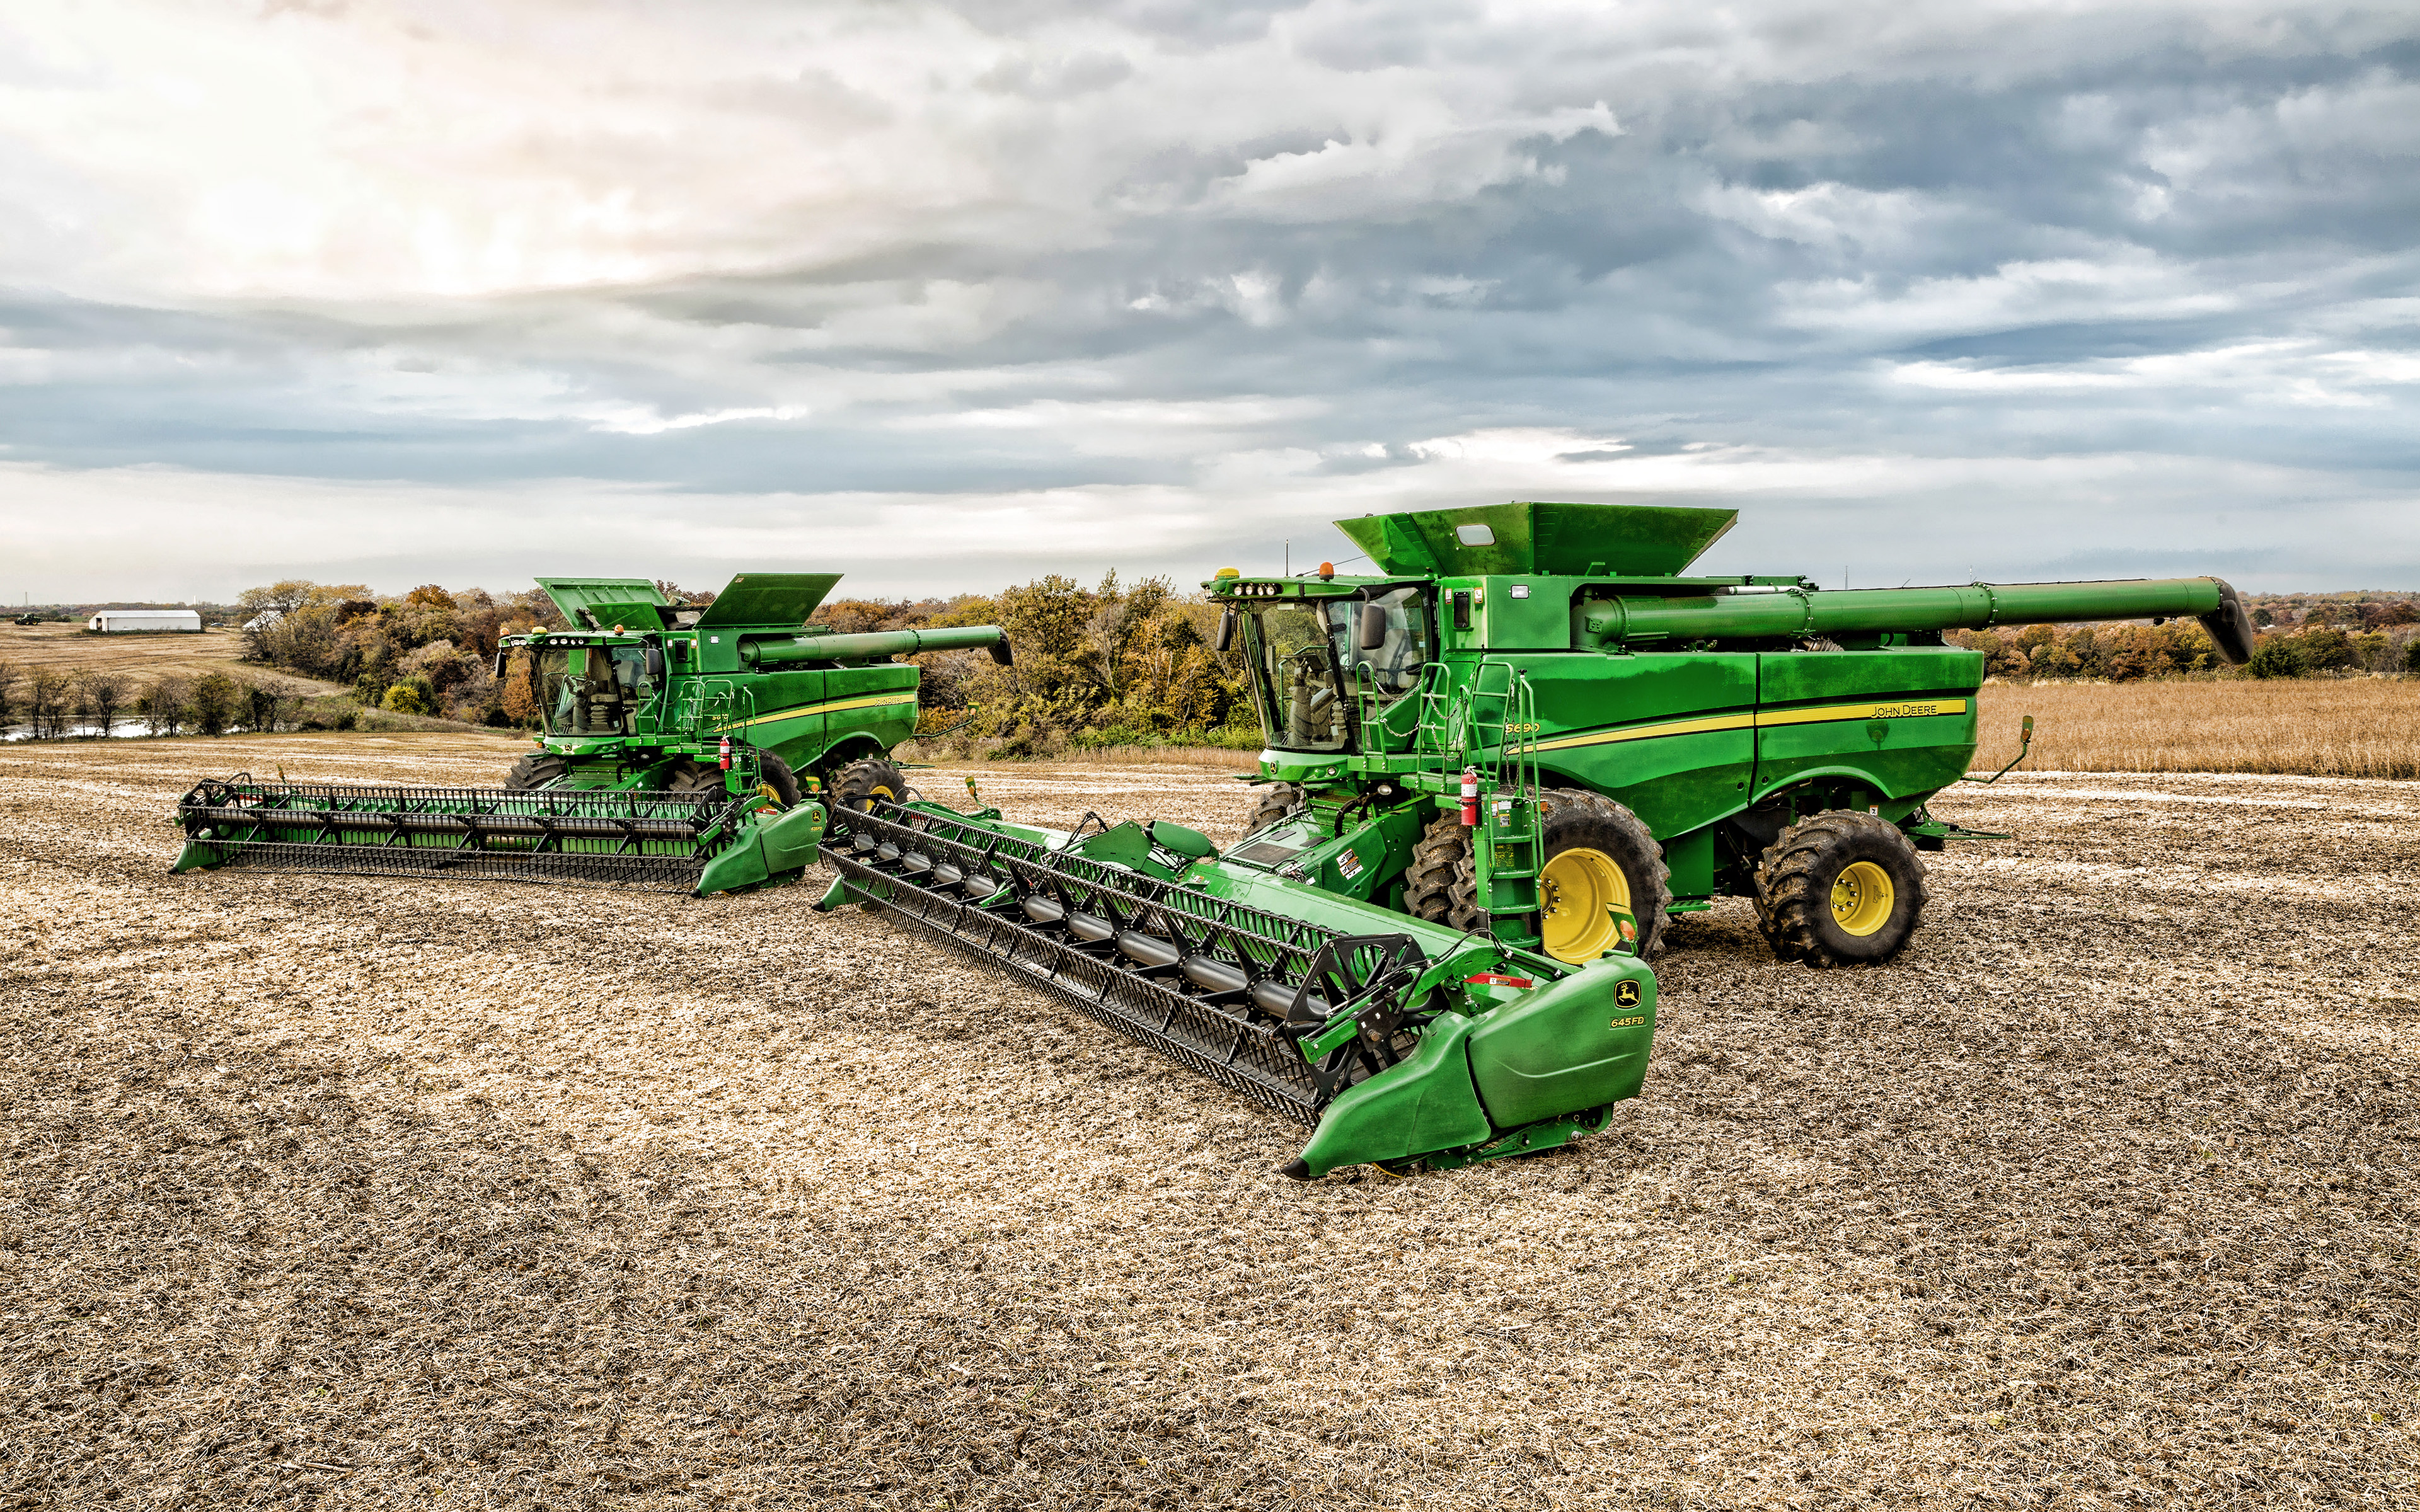 Download wallpaper John Deere S 4k, two harvesters in the field, 2019 combines​, wheat harvest, grain harvesting, agricultural machinery, HDR, combine harvester, 645FD, Combine​ in the field, agriculture, John Deere for desktop